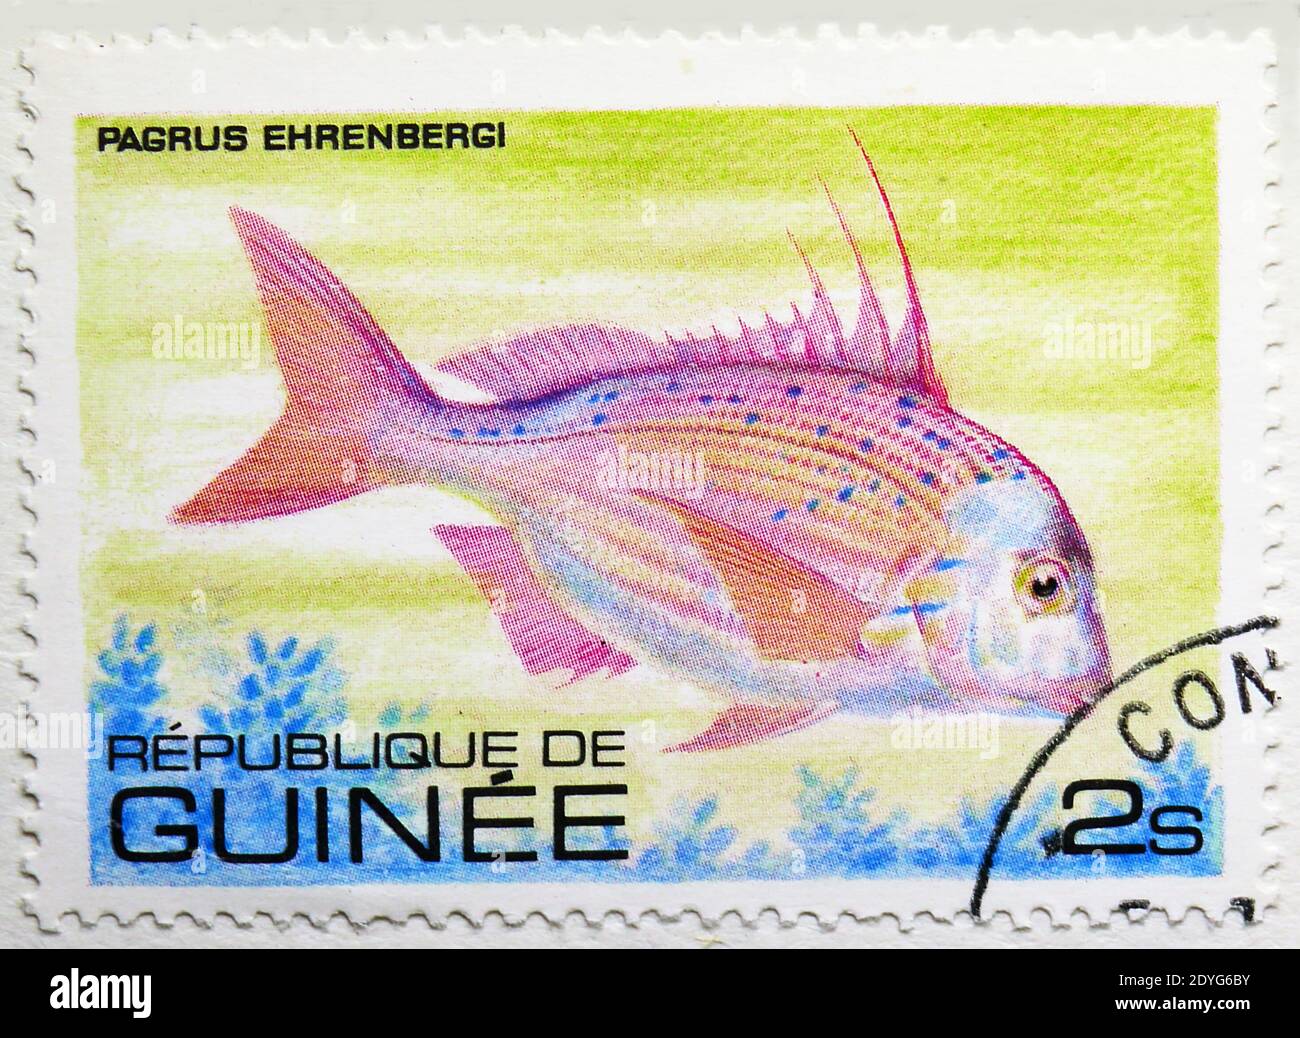 MOSCOW, RUSSIA - AUGUST 4, 2019: Postage stamp printed in Guinea shows Goldenhead Porgy (Pagrus ehrenbergi), Fish serie, circa 1980 Stock Photo